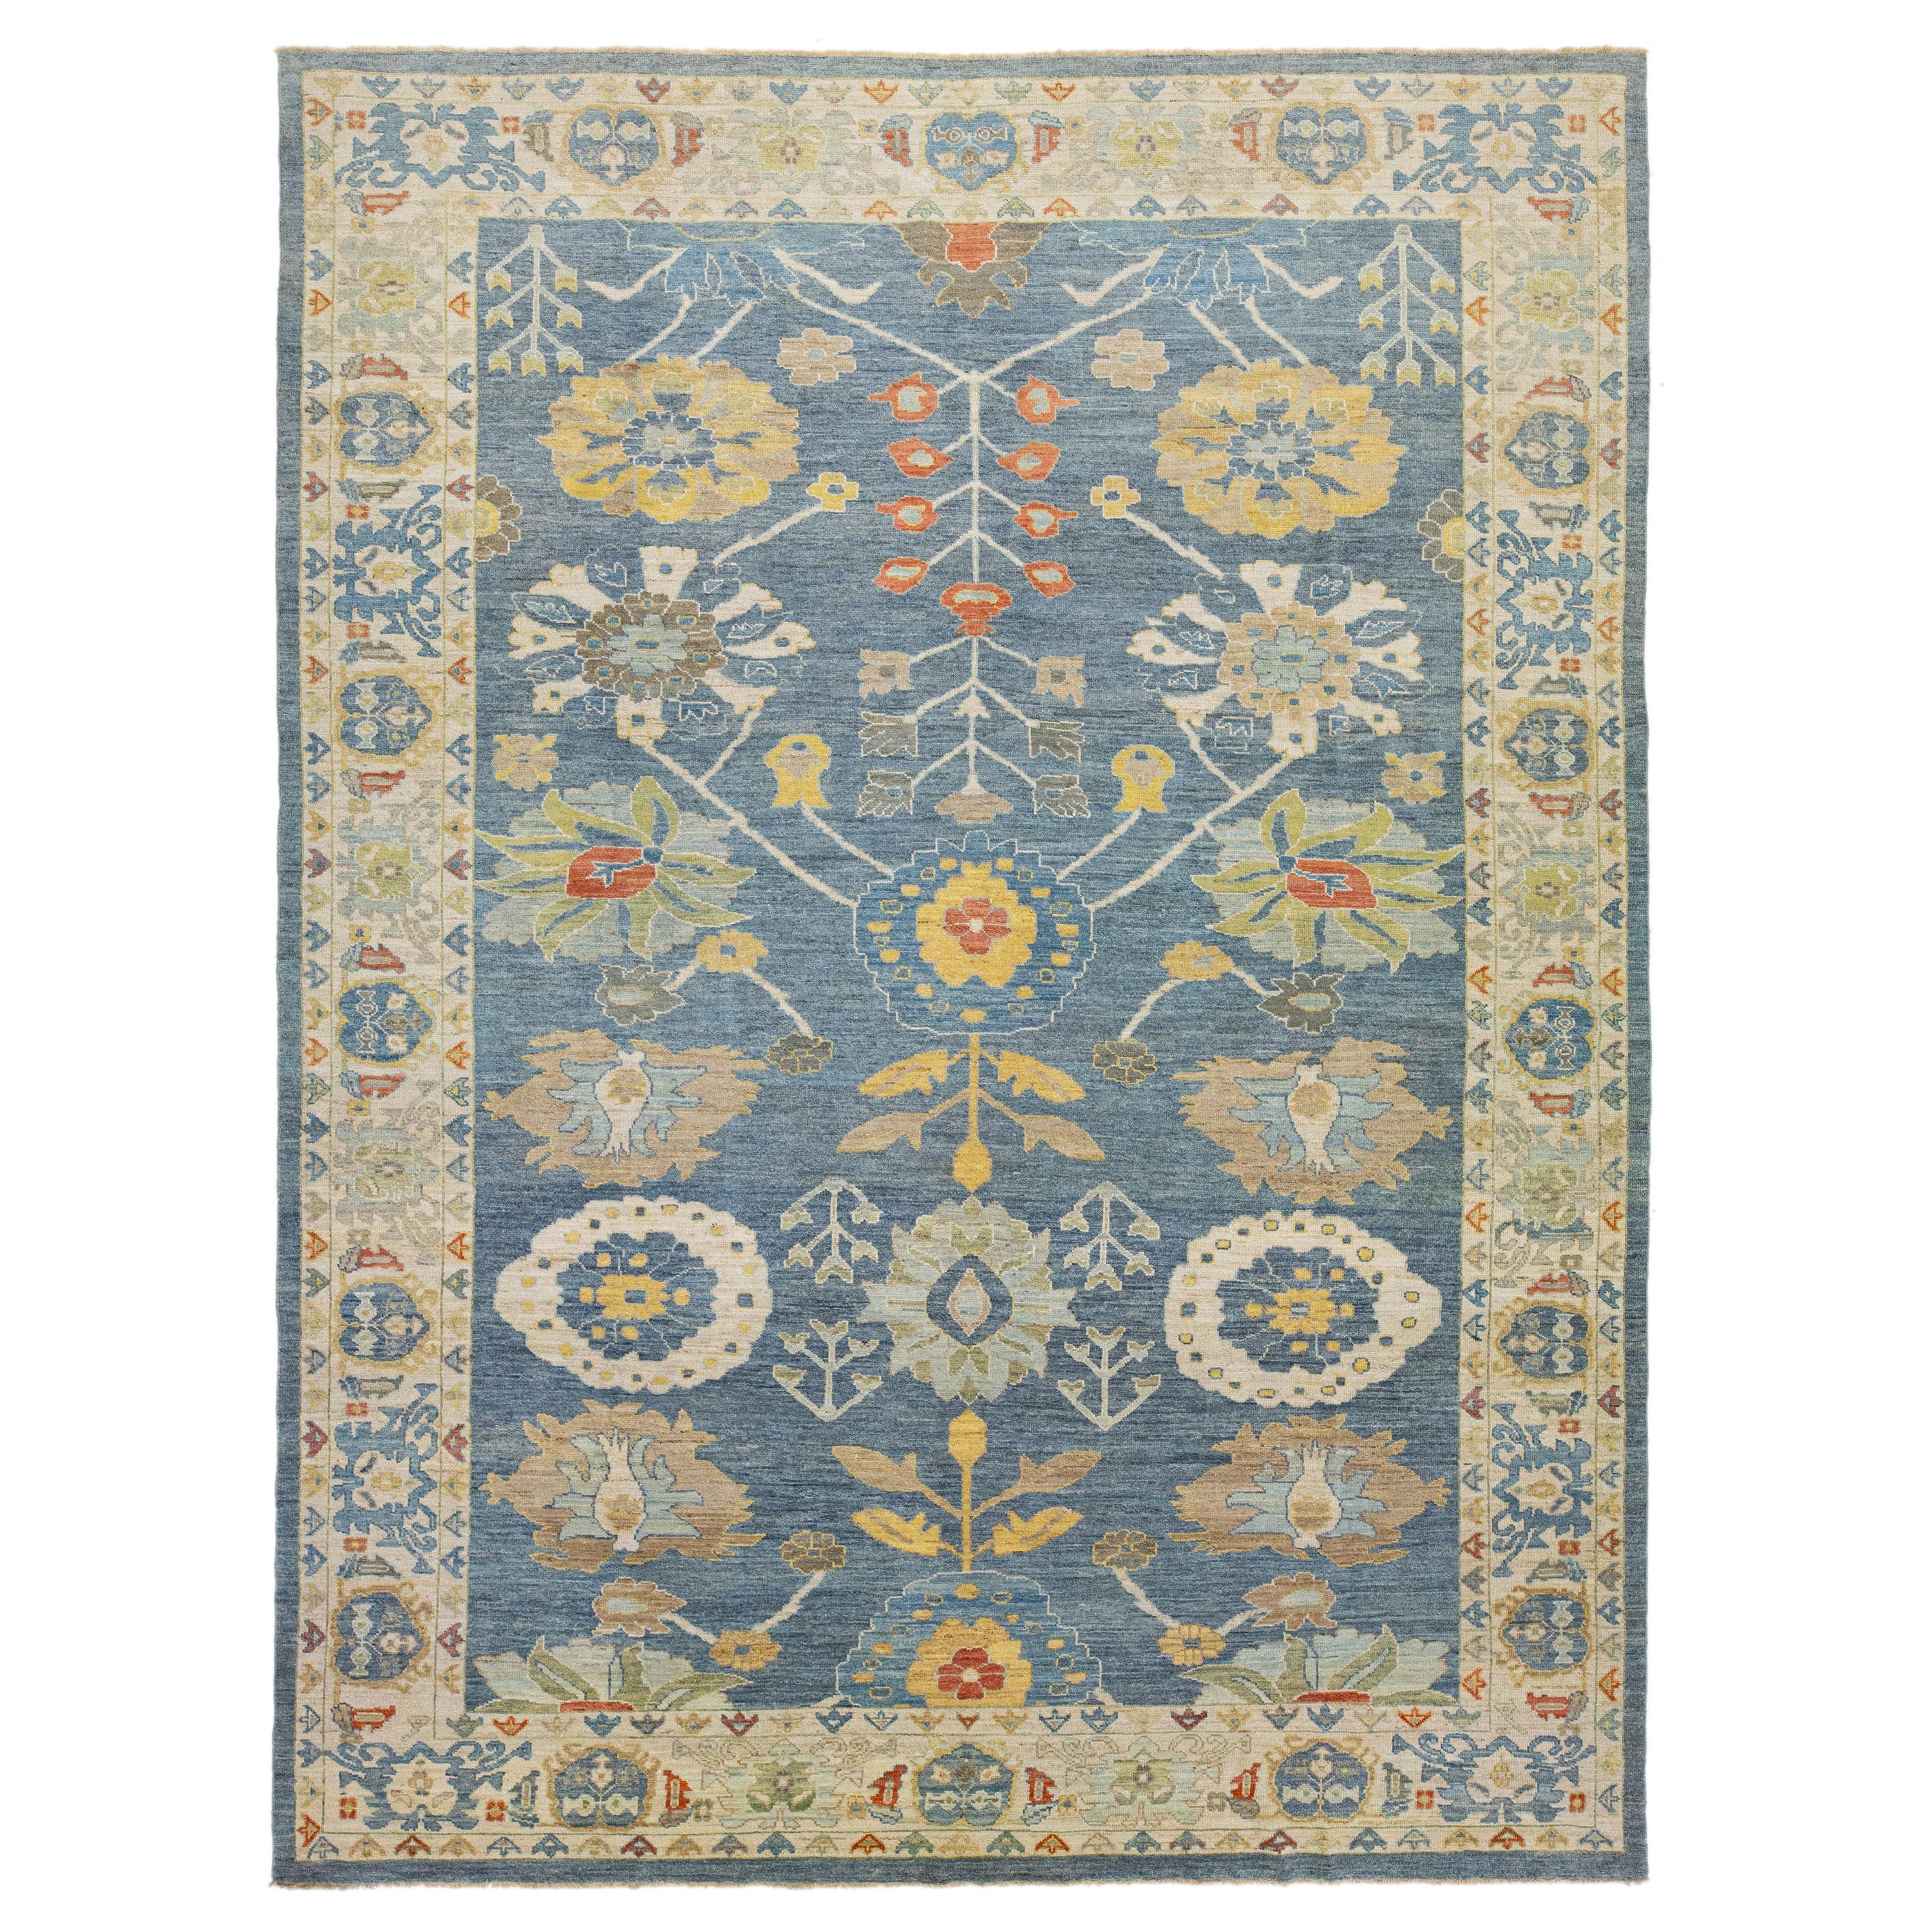 Modern Navy Blue Sultanabad Wool Rug Handmade with Floral Design